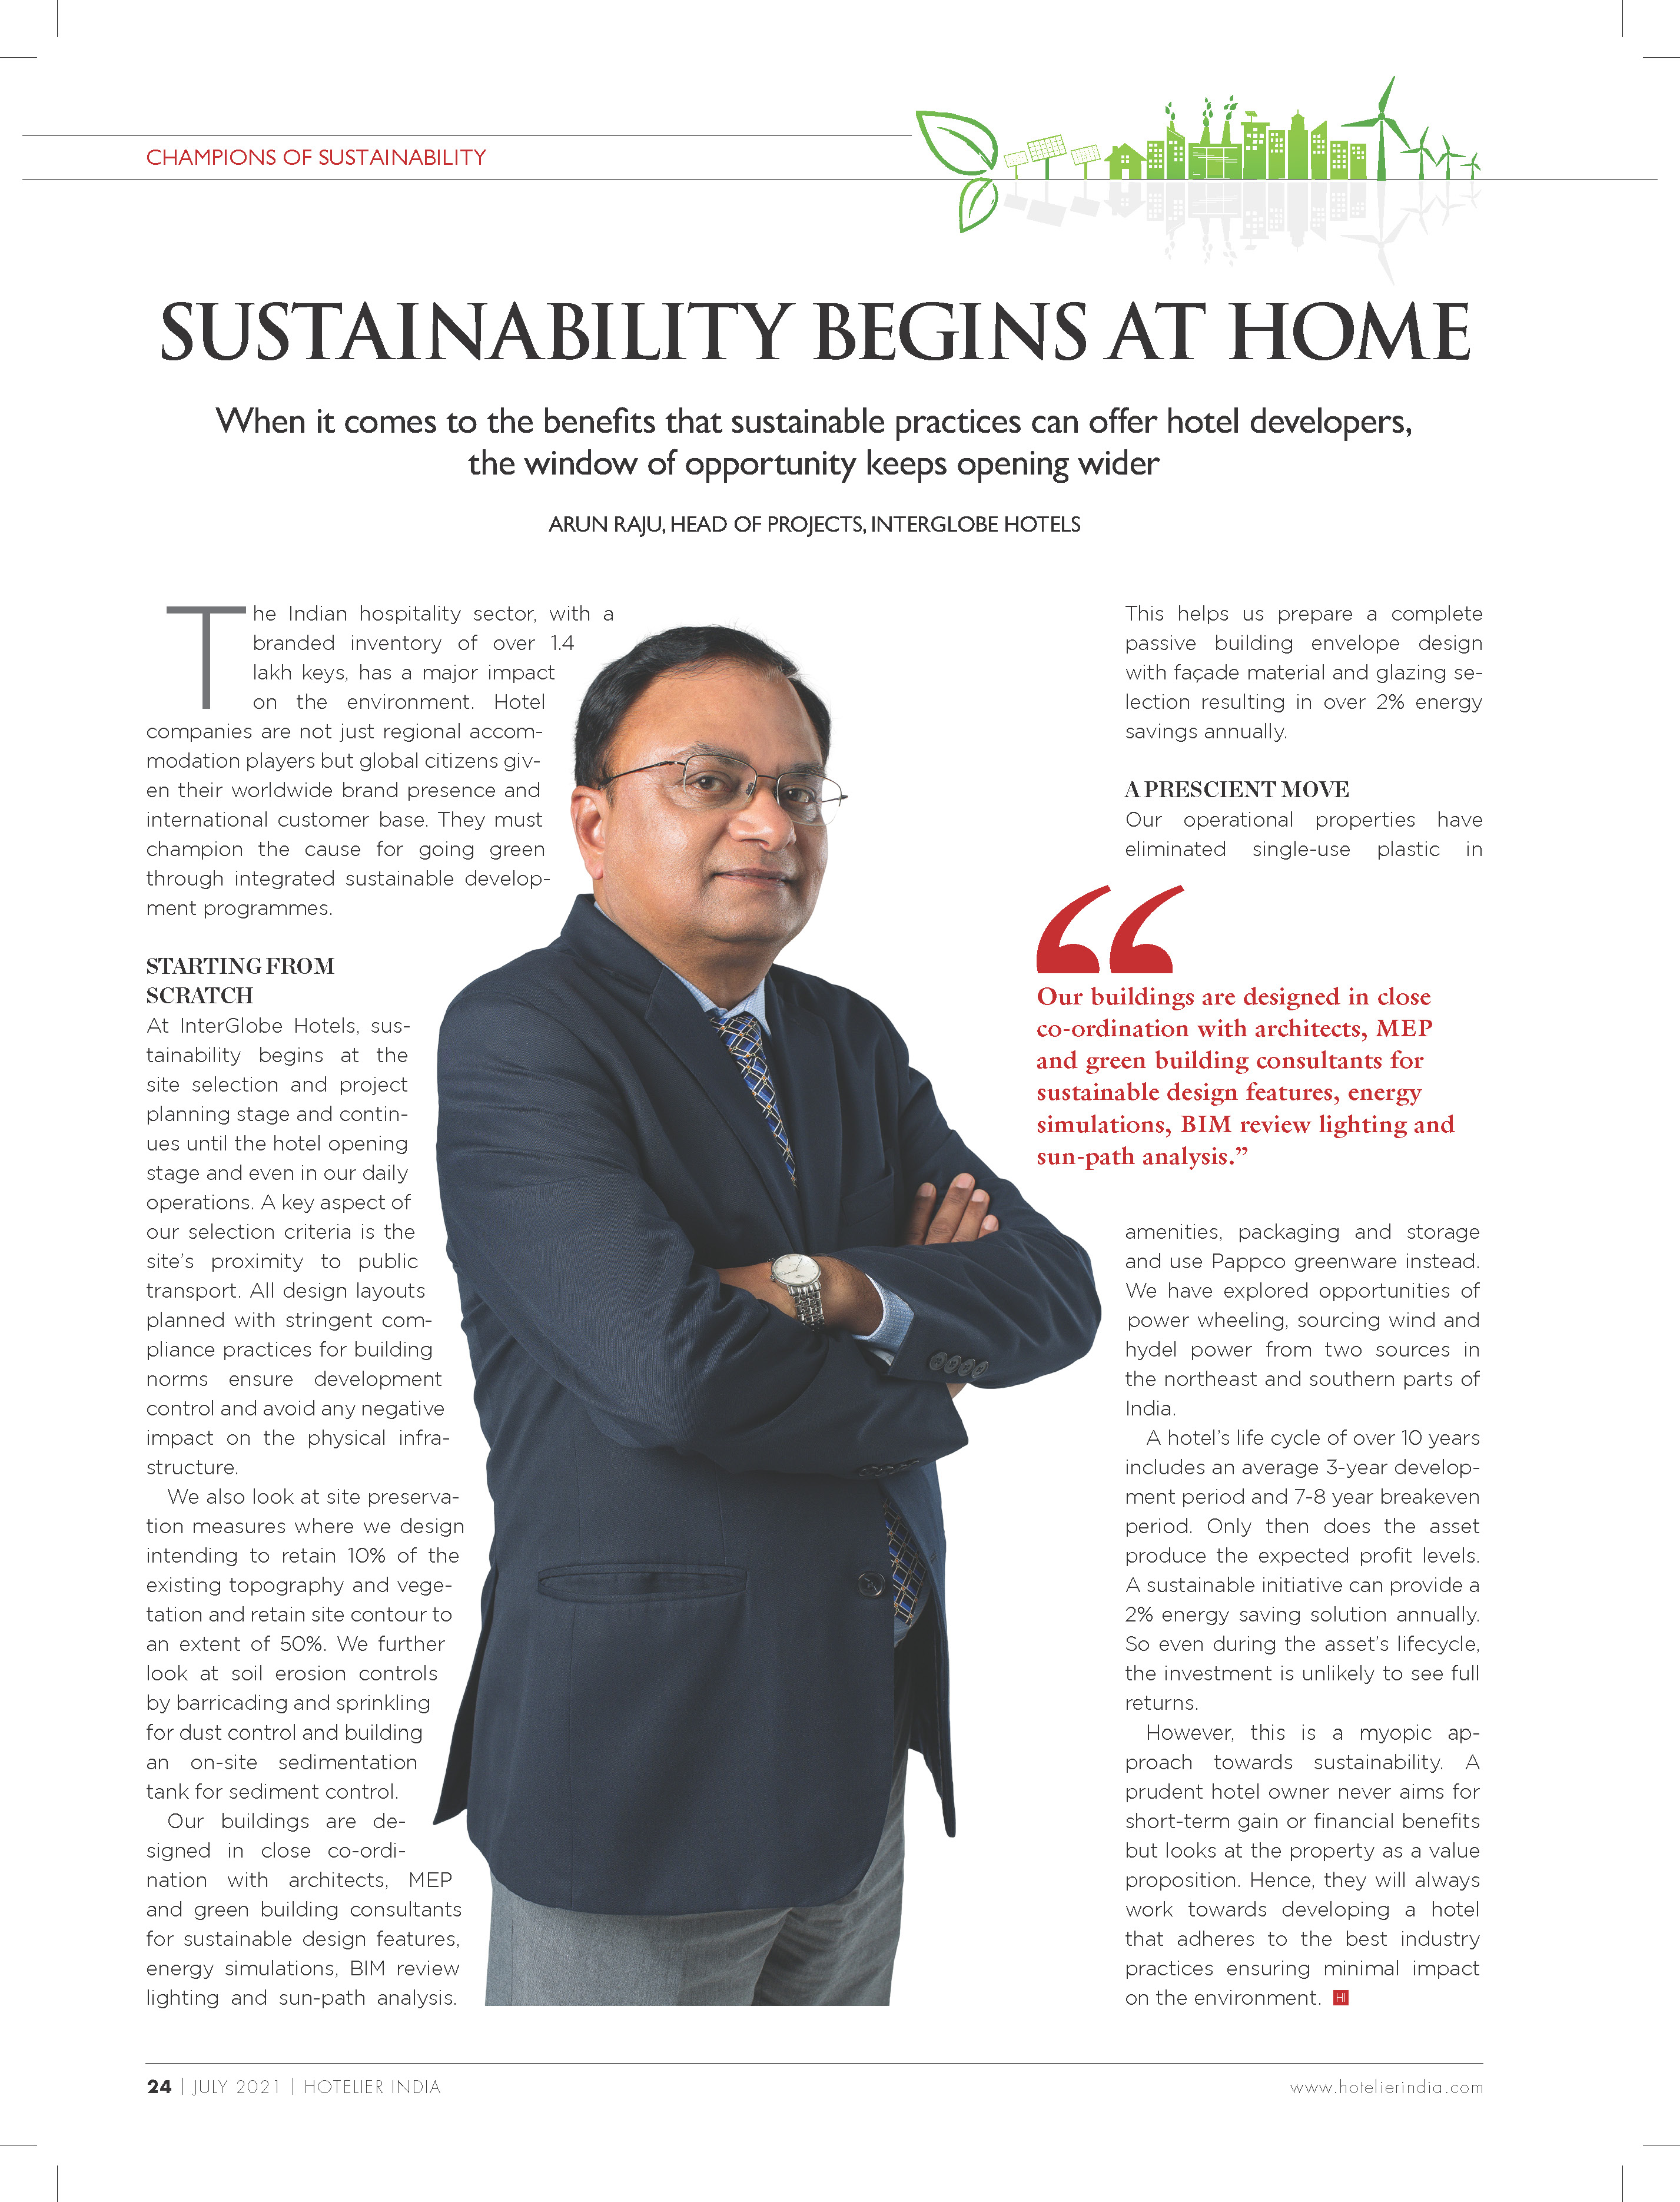 Sustainability begins at home